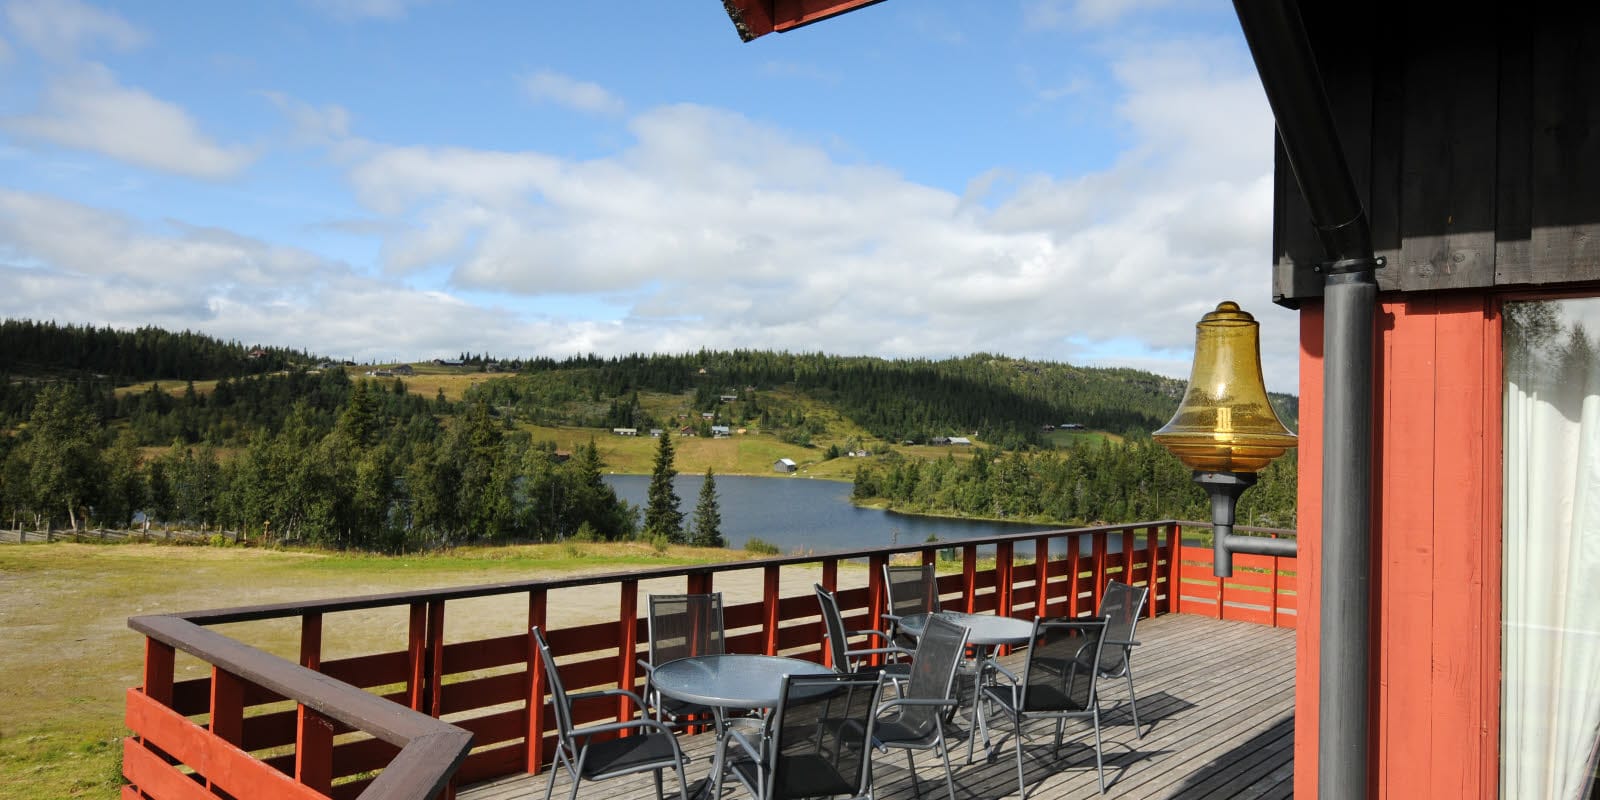 Mountain veranda with seating area and sun at Austlid fjellstue at Thon Hotel Skeikampen